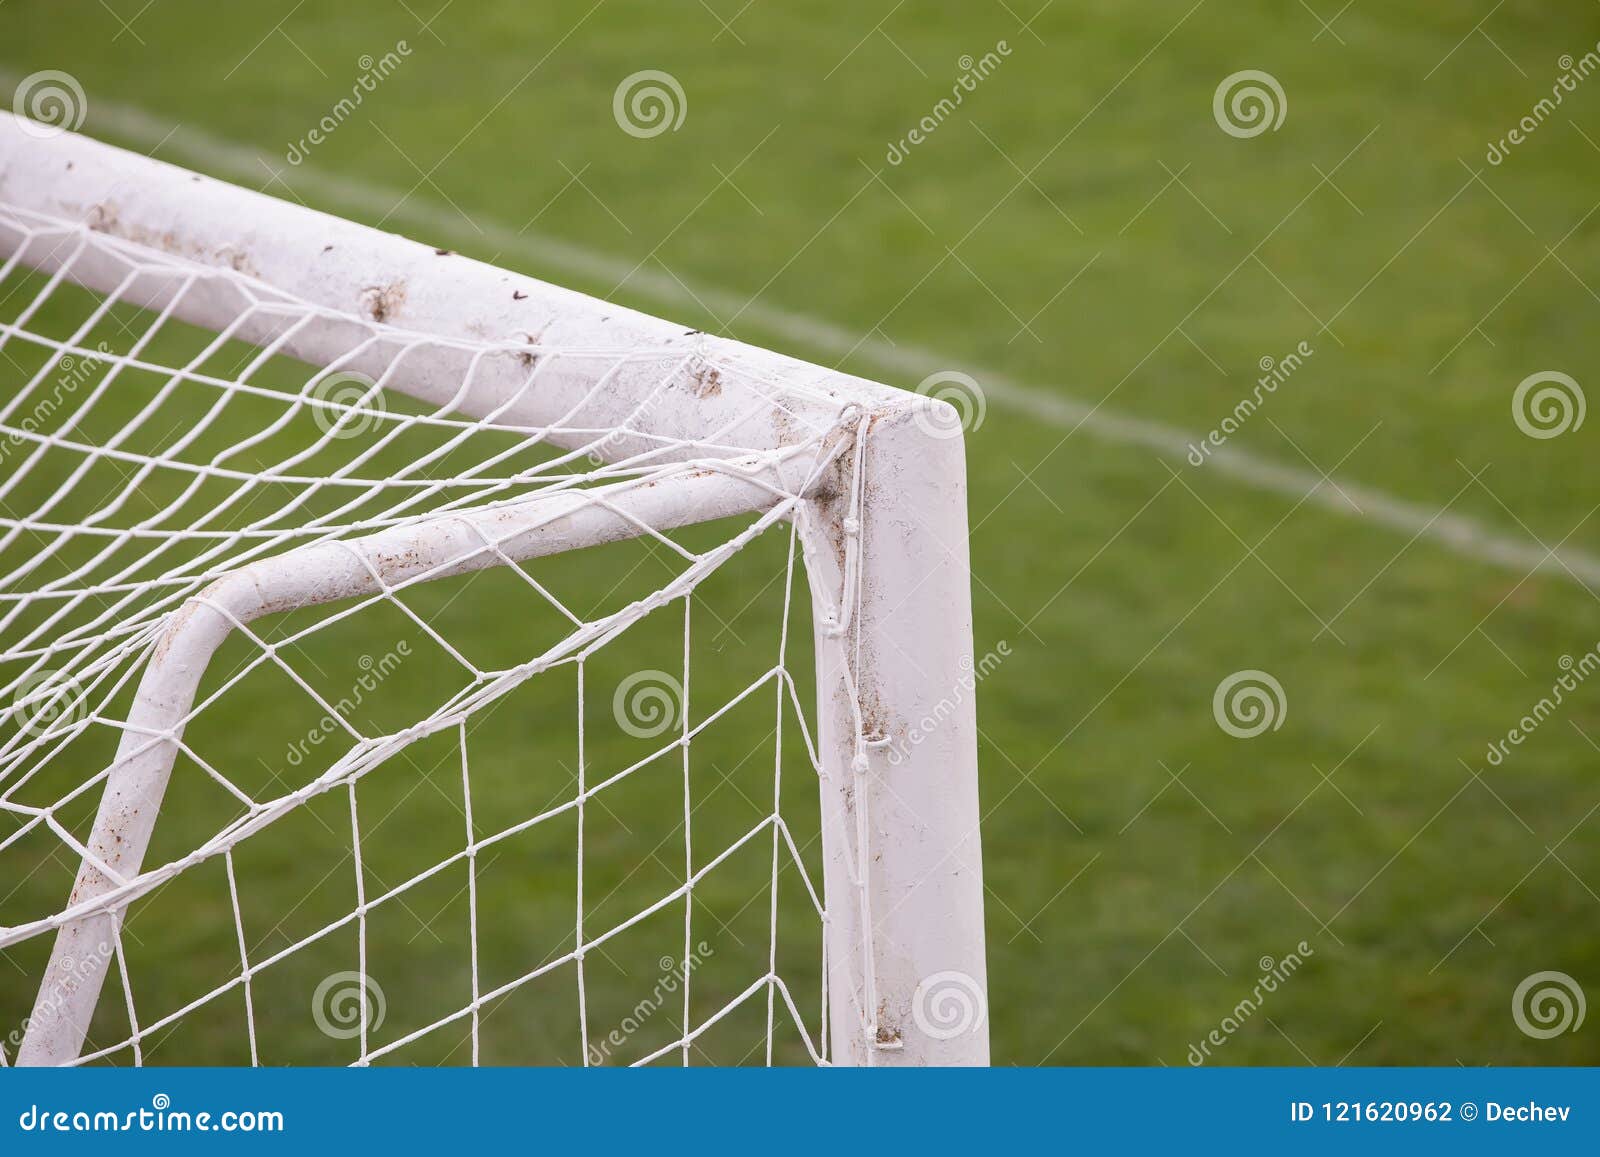 Close Up Of Soccer Football Goal With Soccer Field Stock Photo Image Of Soccer Stadium